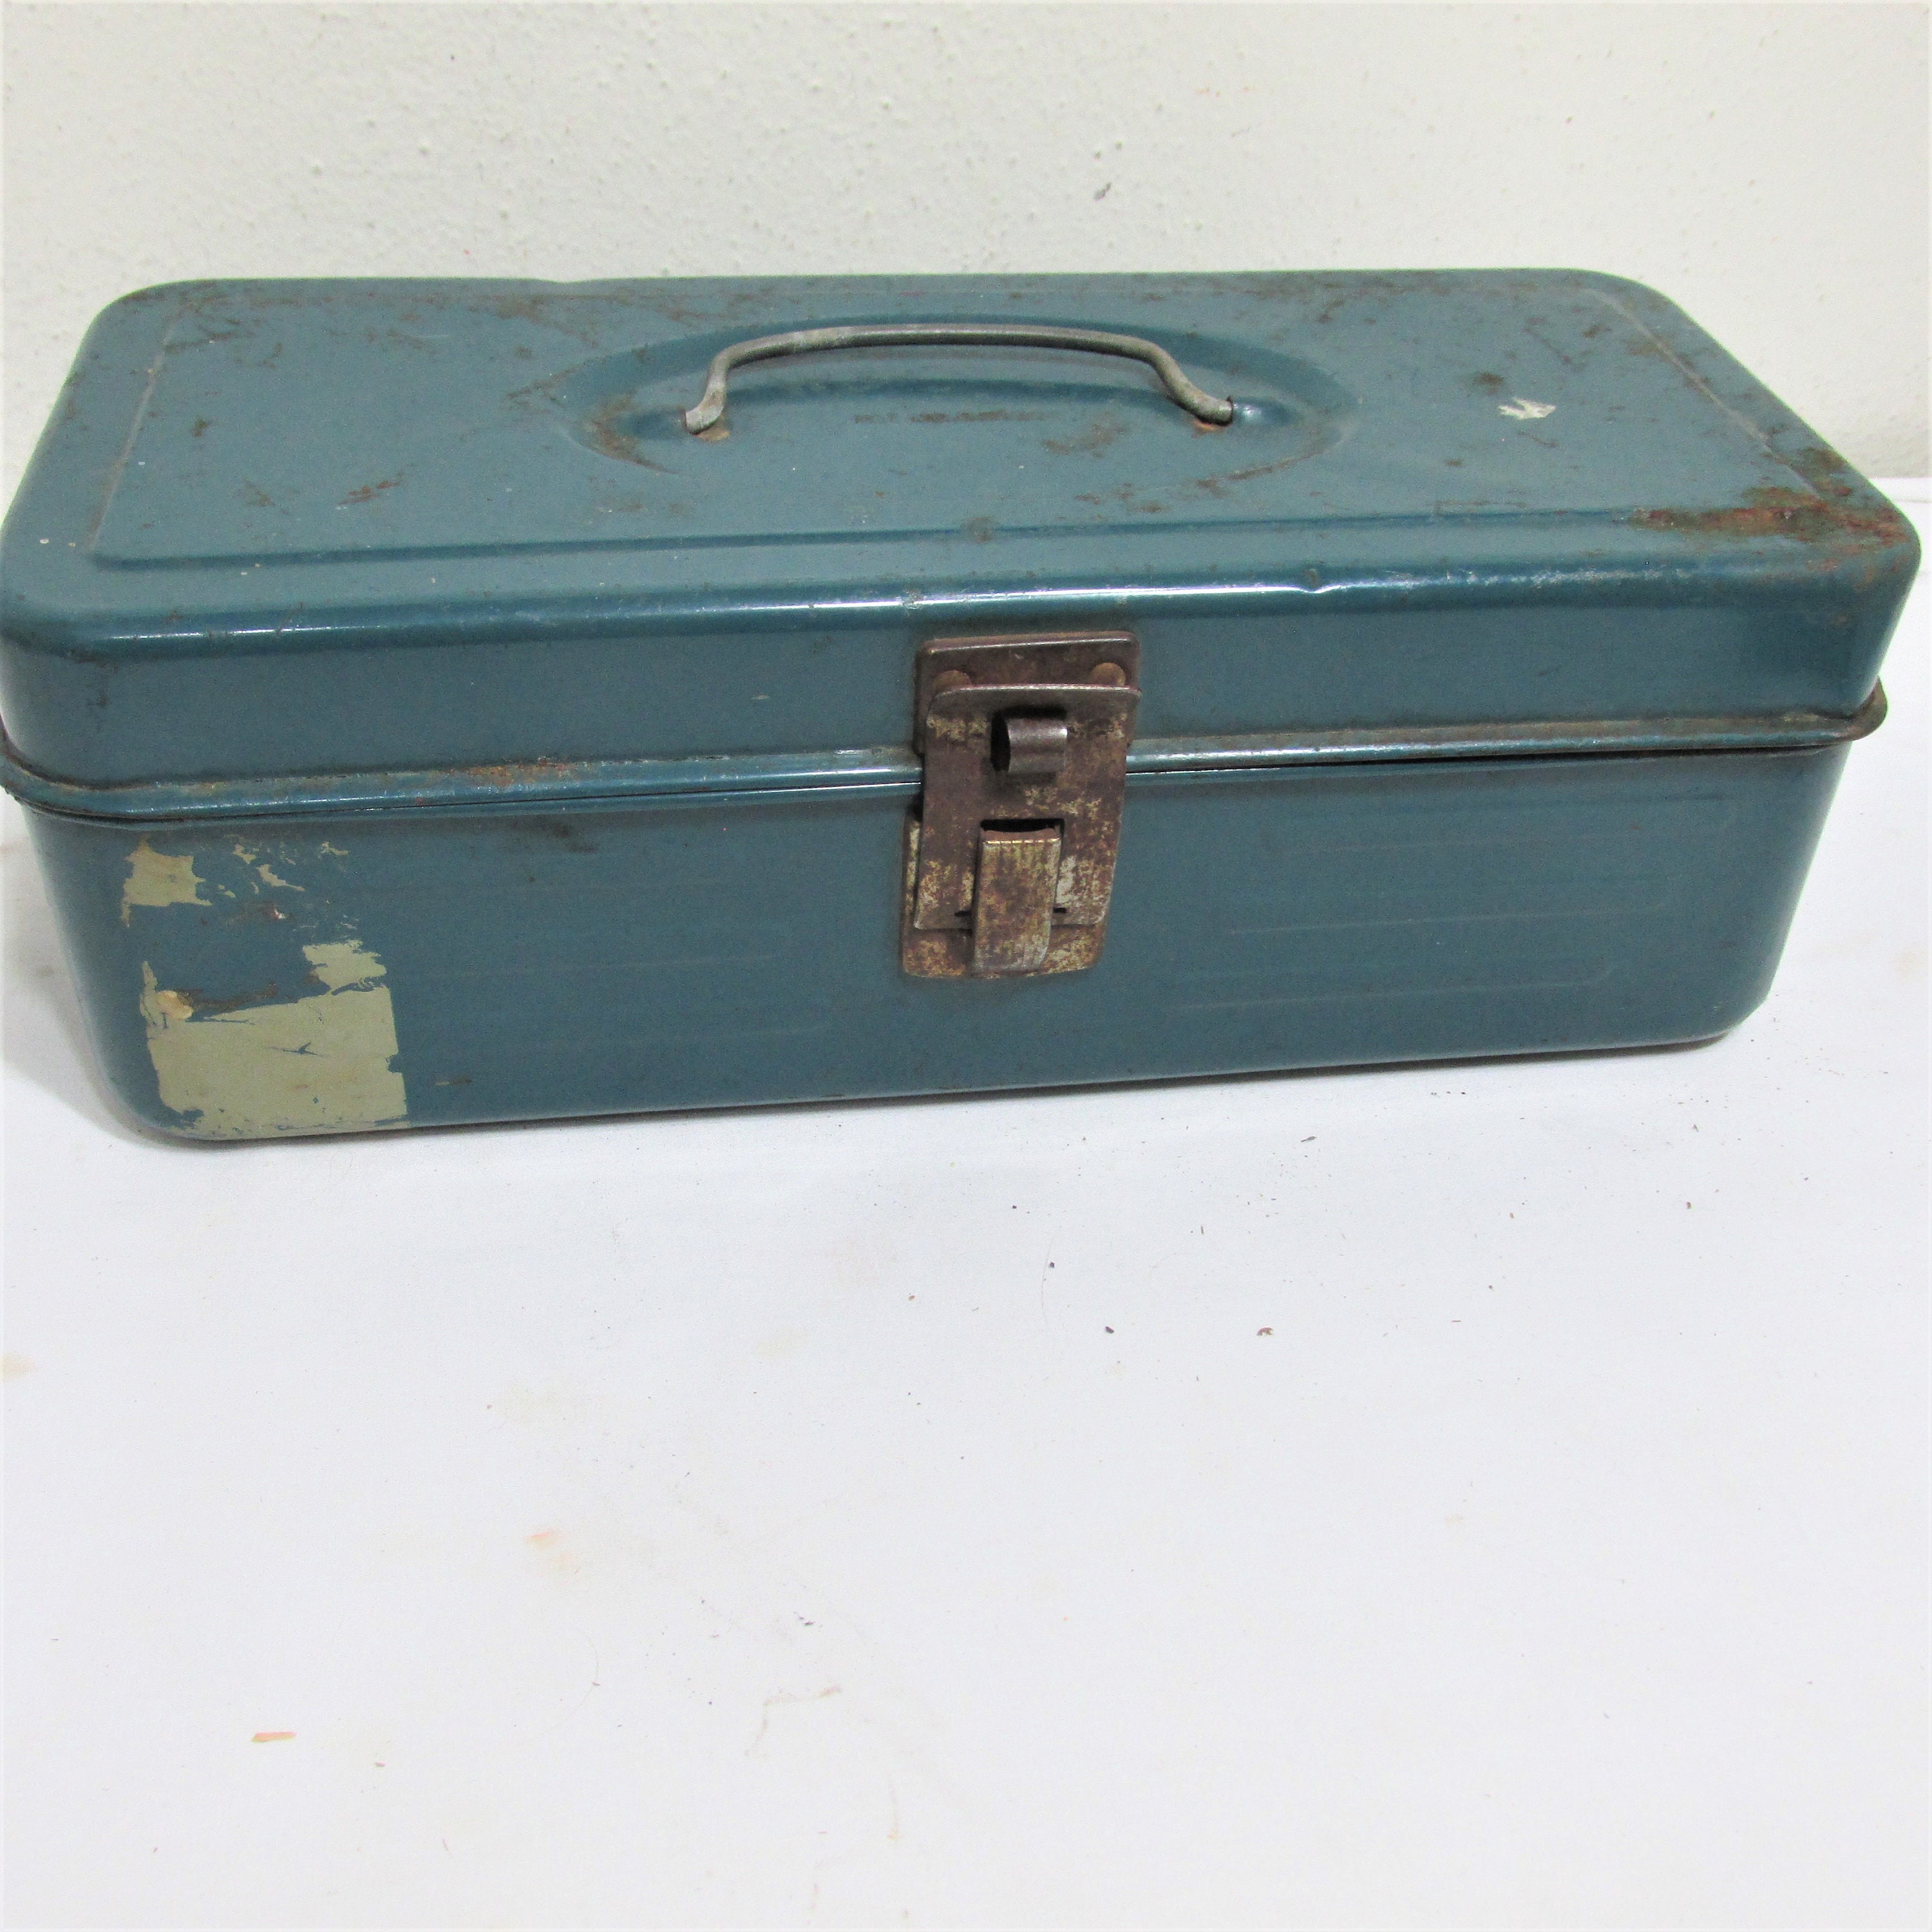 Mid-century Metal Tackle Box with Vintage Tackle - Lures, Hooks, Weights &  More - Old Tackle Box